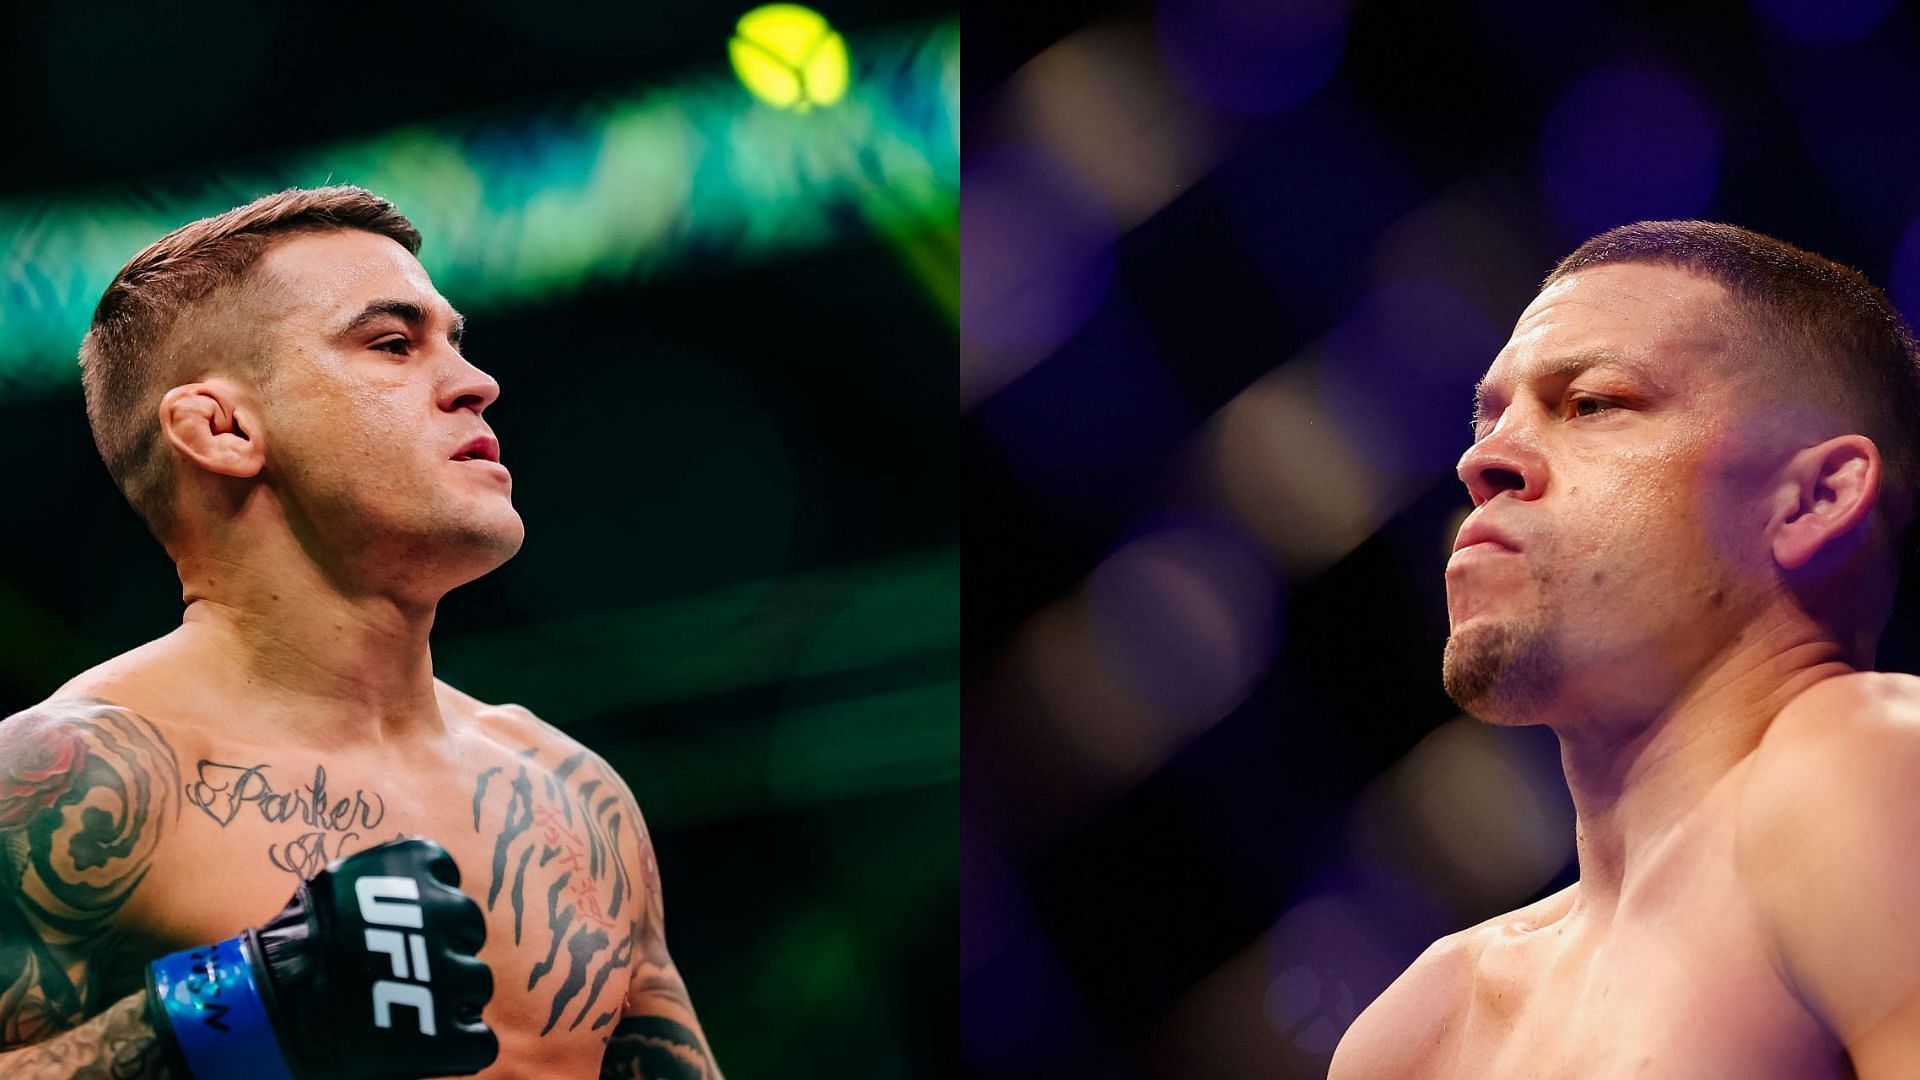 Dustin Poirier (Left) and Nate Diaz (Right) (Image courtesy of Getty)